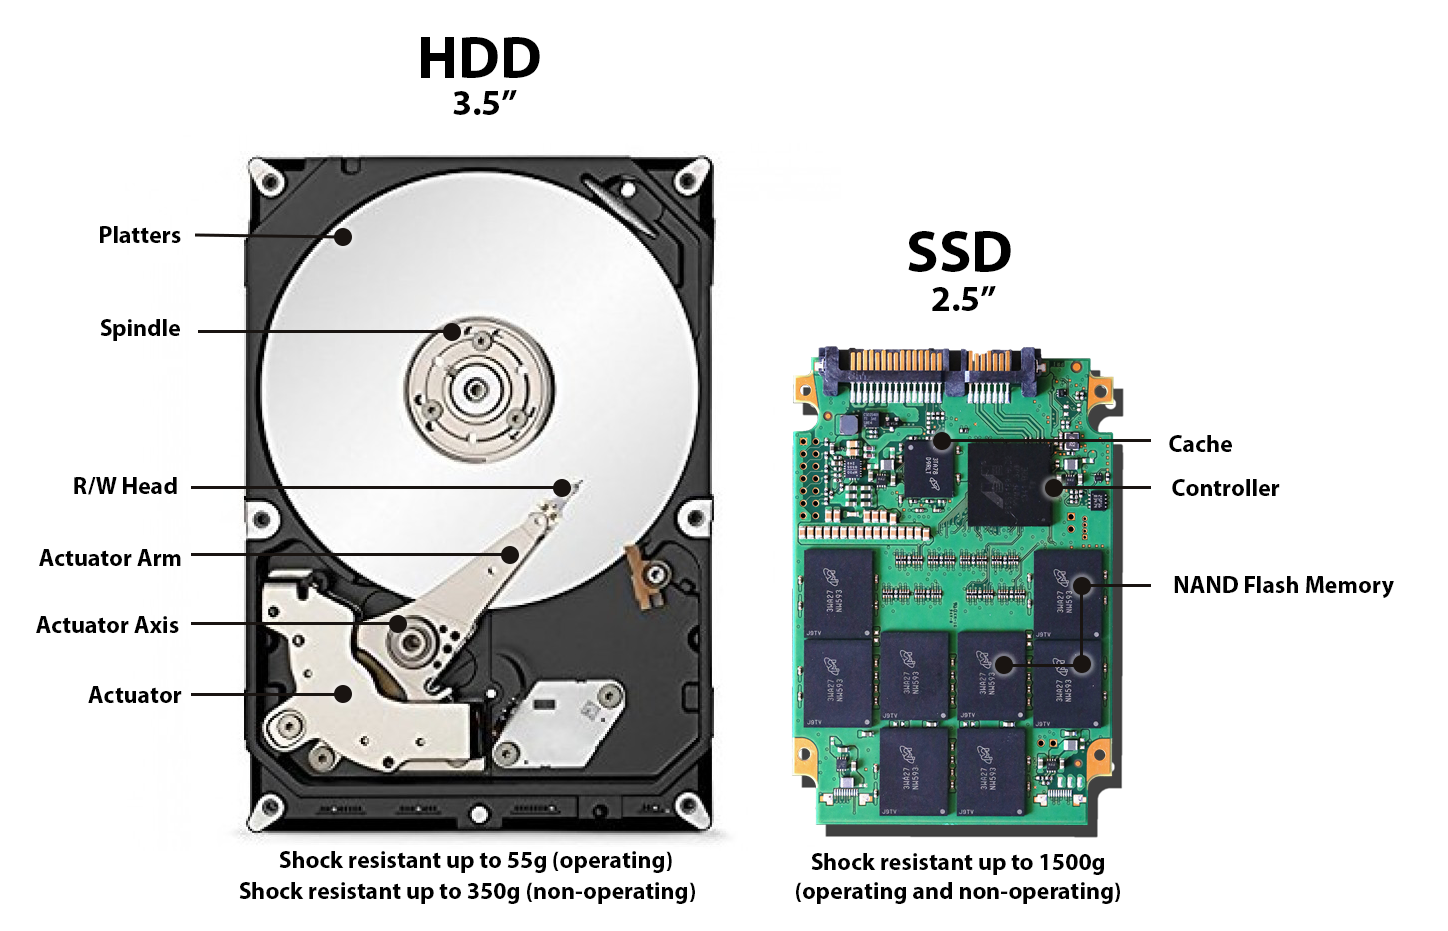 Hdd Vs Ssd What Does The Future For Storage Hold